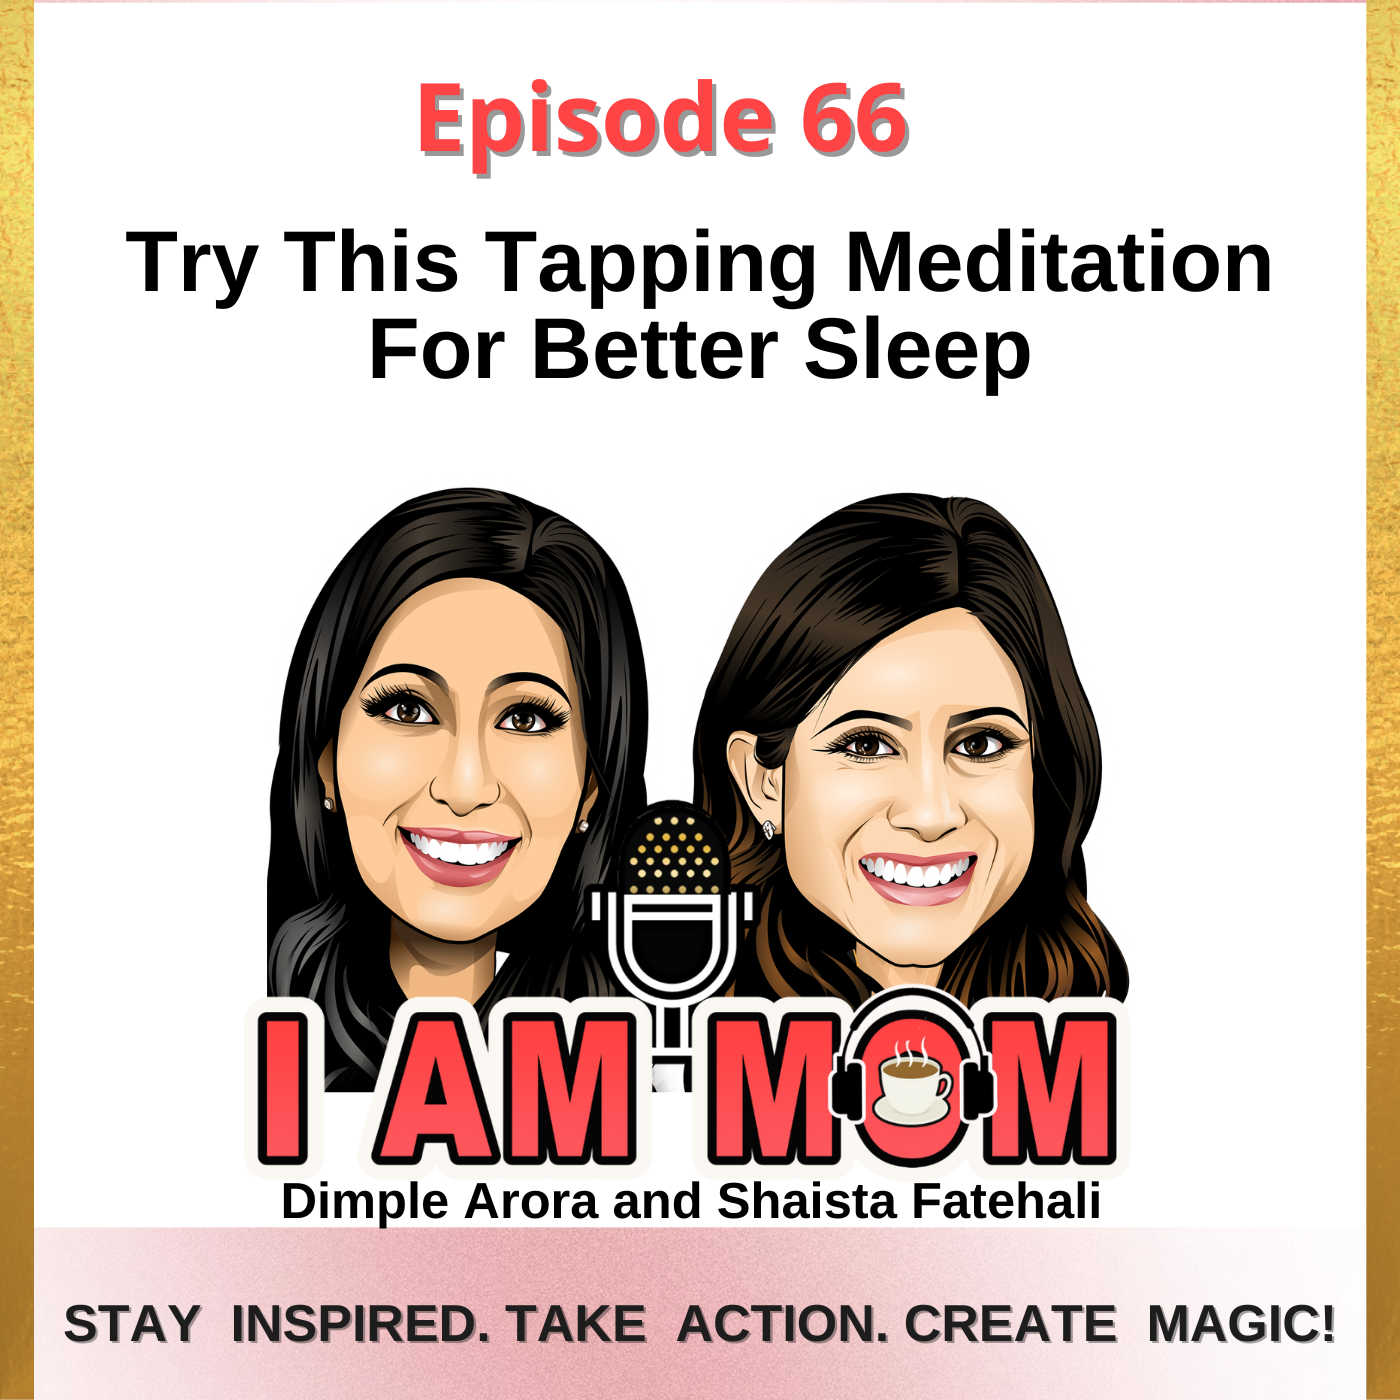 Ep 66 - Try This Tapping Meditation For Better Sleep